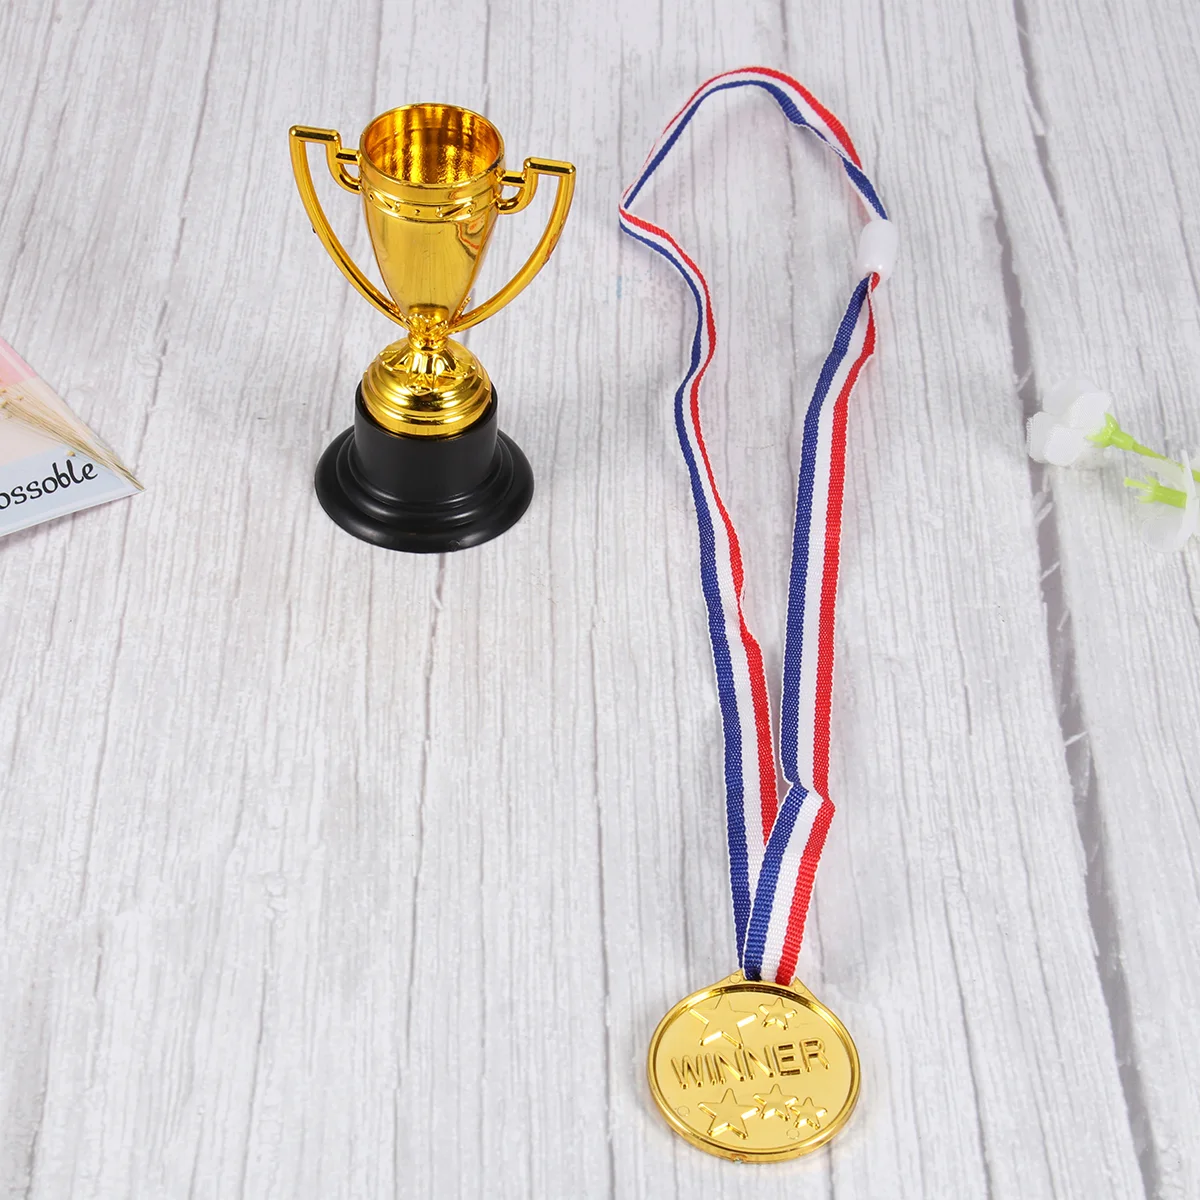 16 Pcs Gifts for Stocking Stuffers Small Medals Prize Awards Trophy Kids Reward Prizes Child